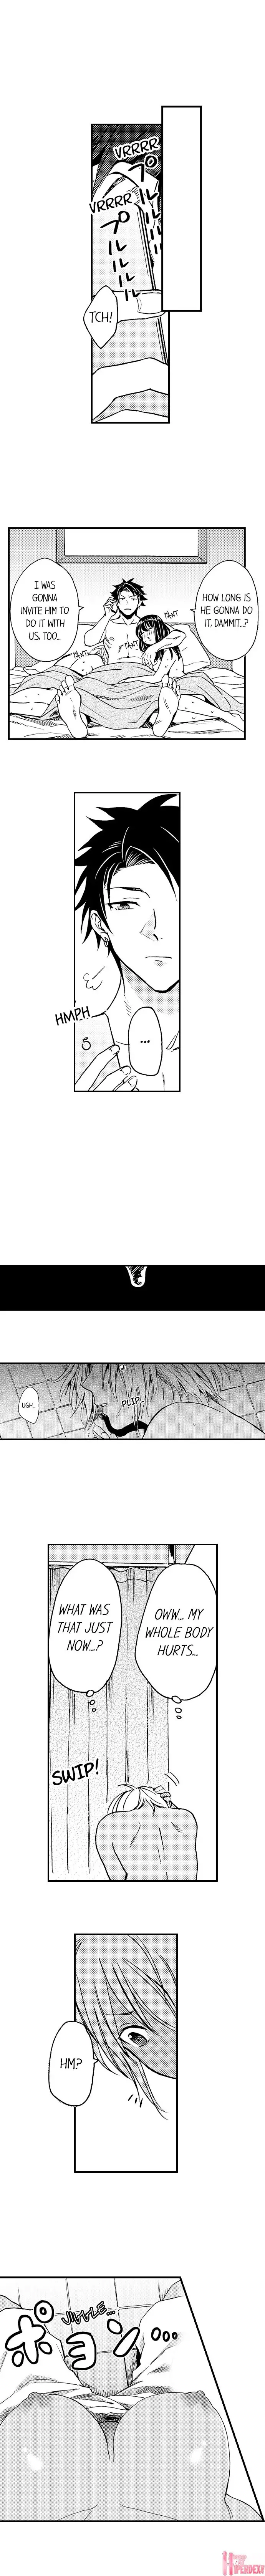 Fucked by My Best Friend - Chapter 1 Page 6